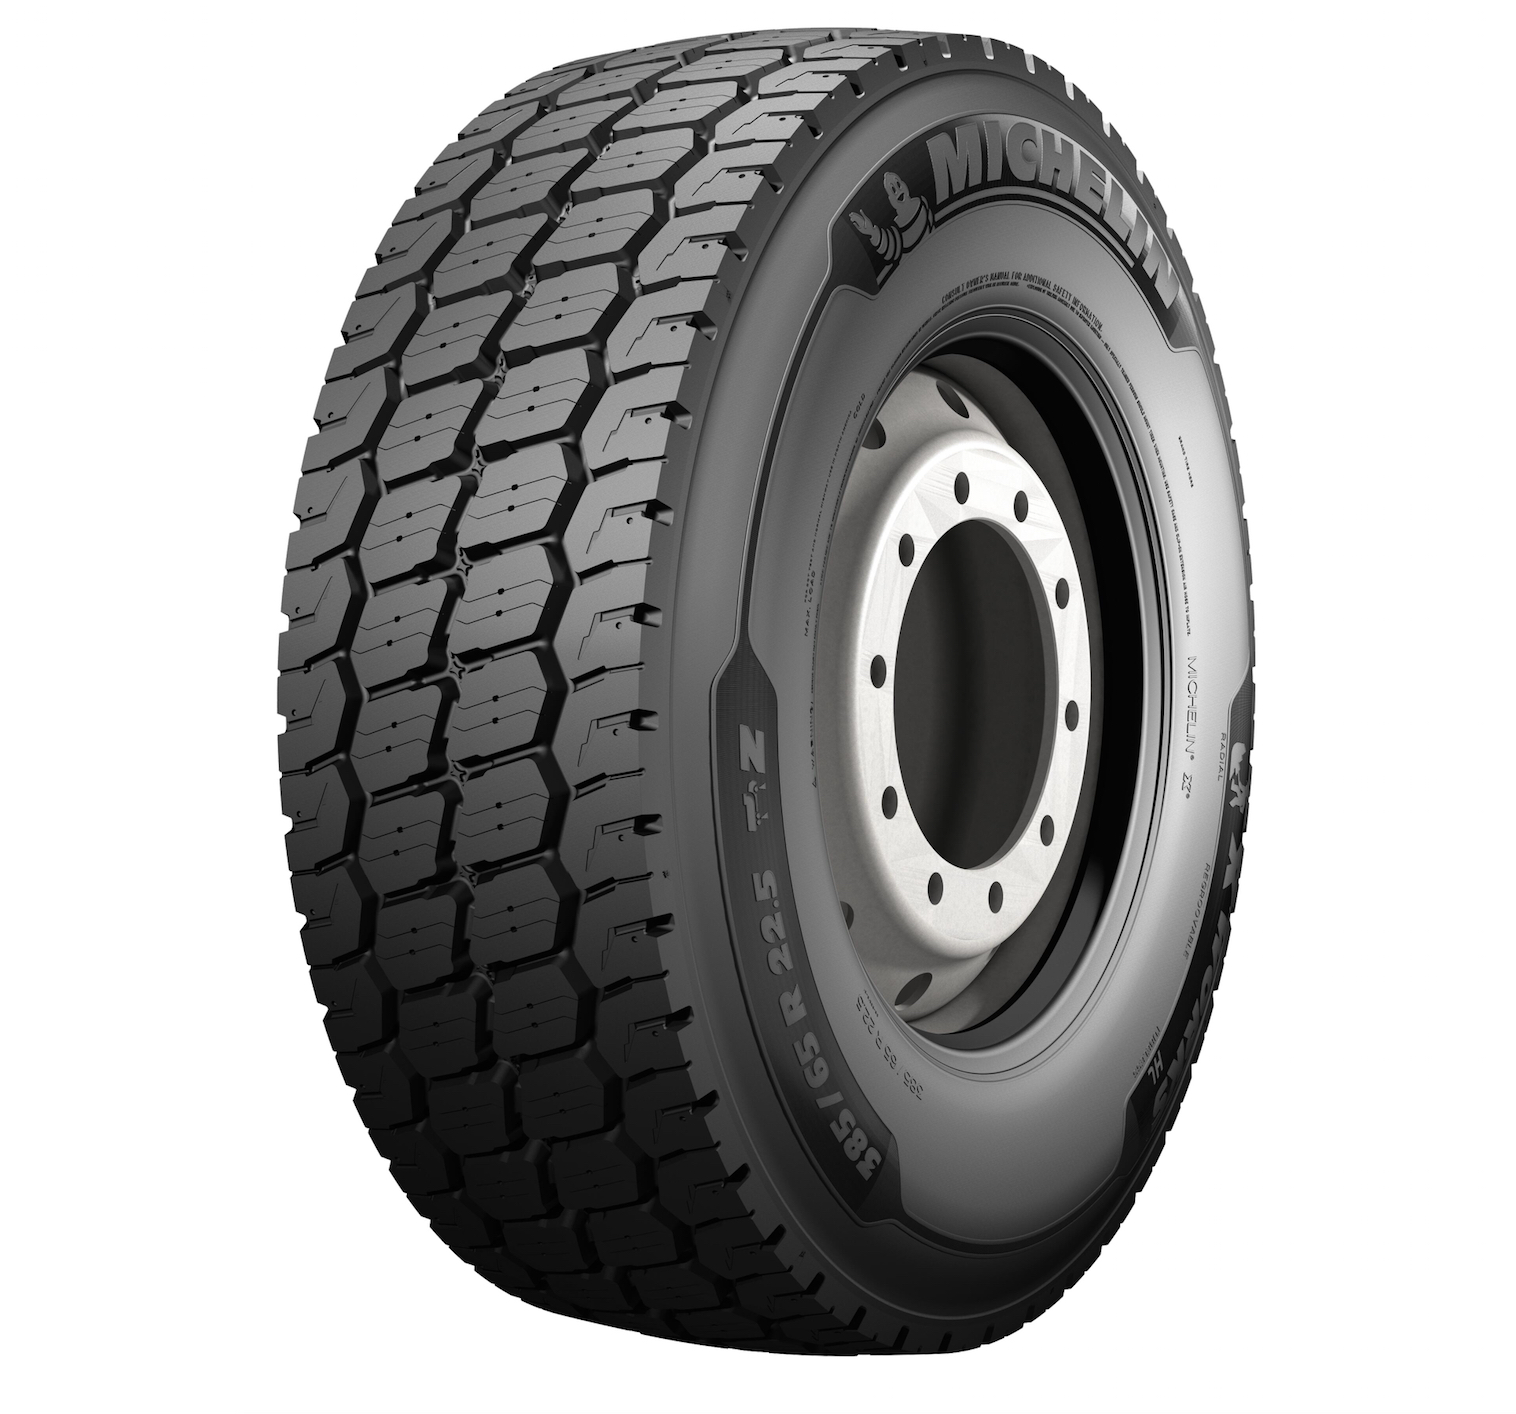 Michelin X Works HLZ 385/65R22.5 Rated 164J